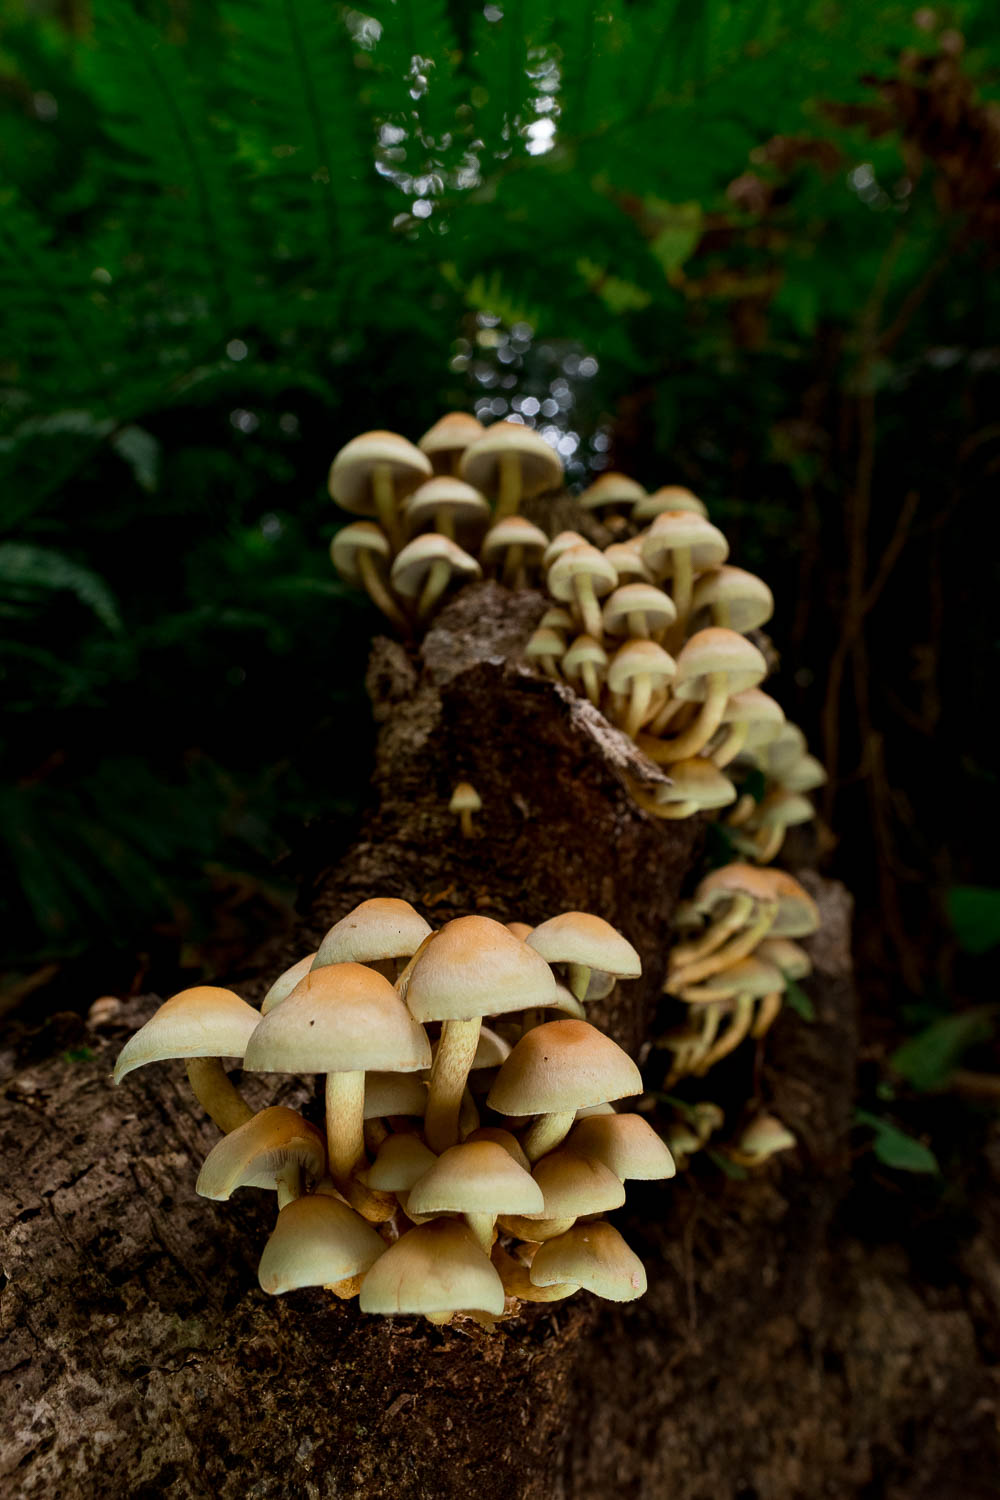 A cluster of mushrooms grows on a decaying log in a forest setting.